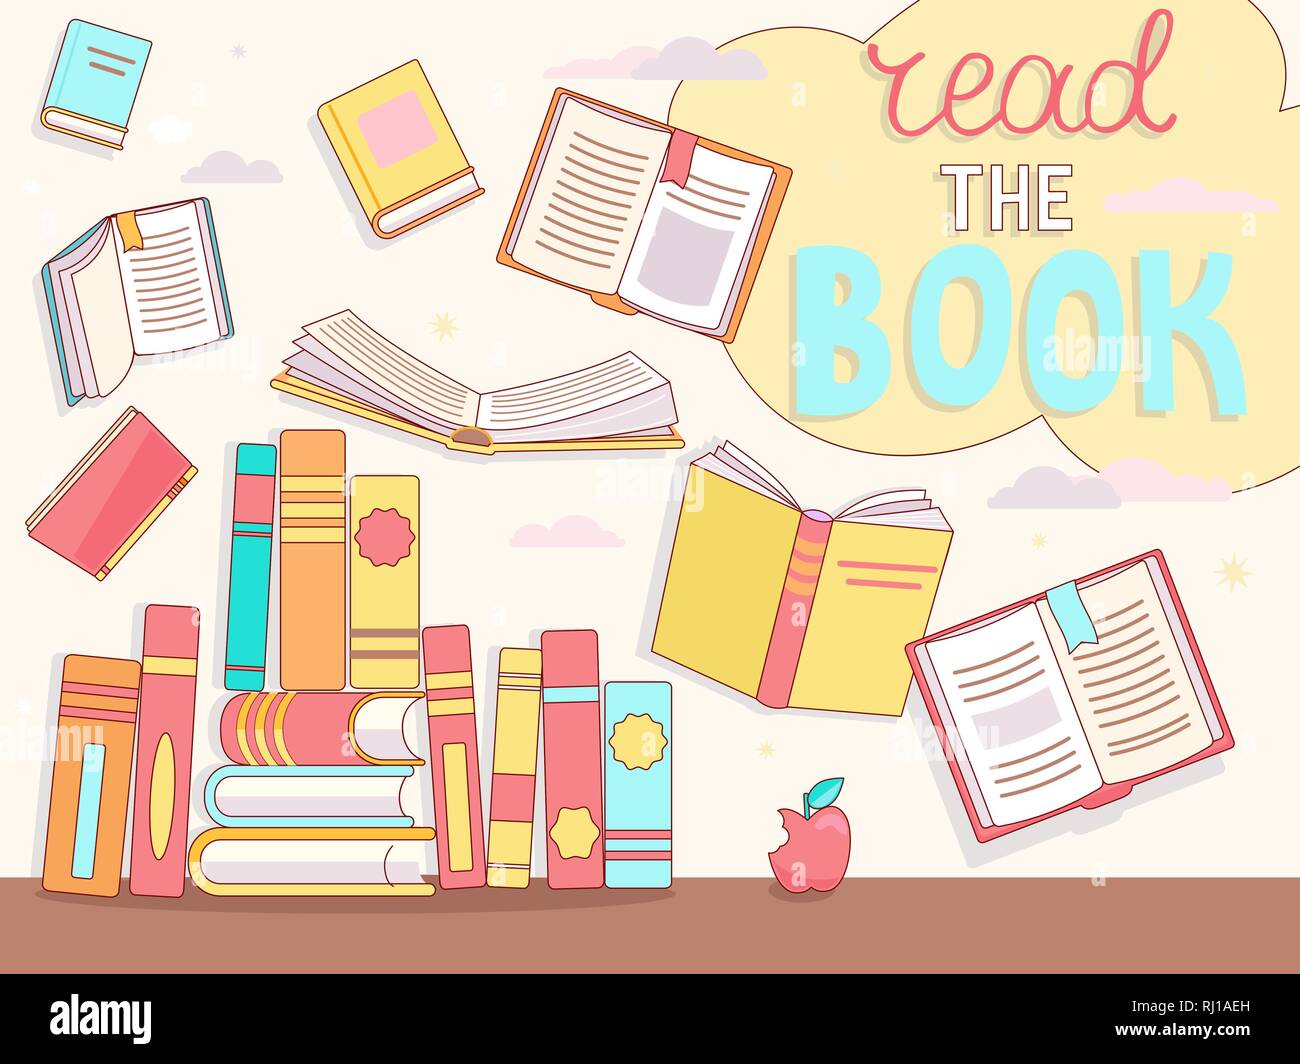 Read the book concept, close and open books. Stock Vector